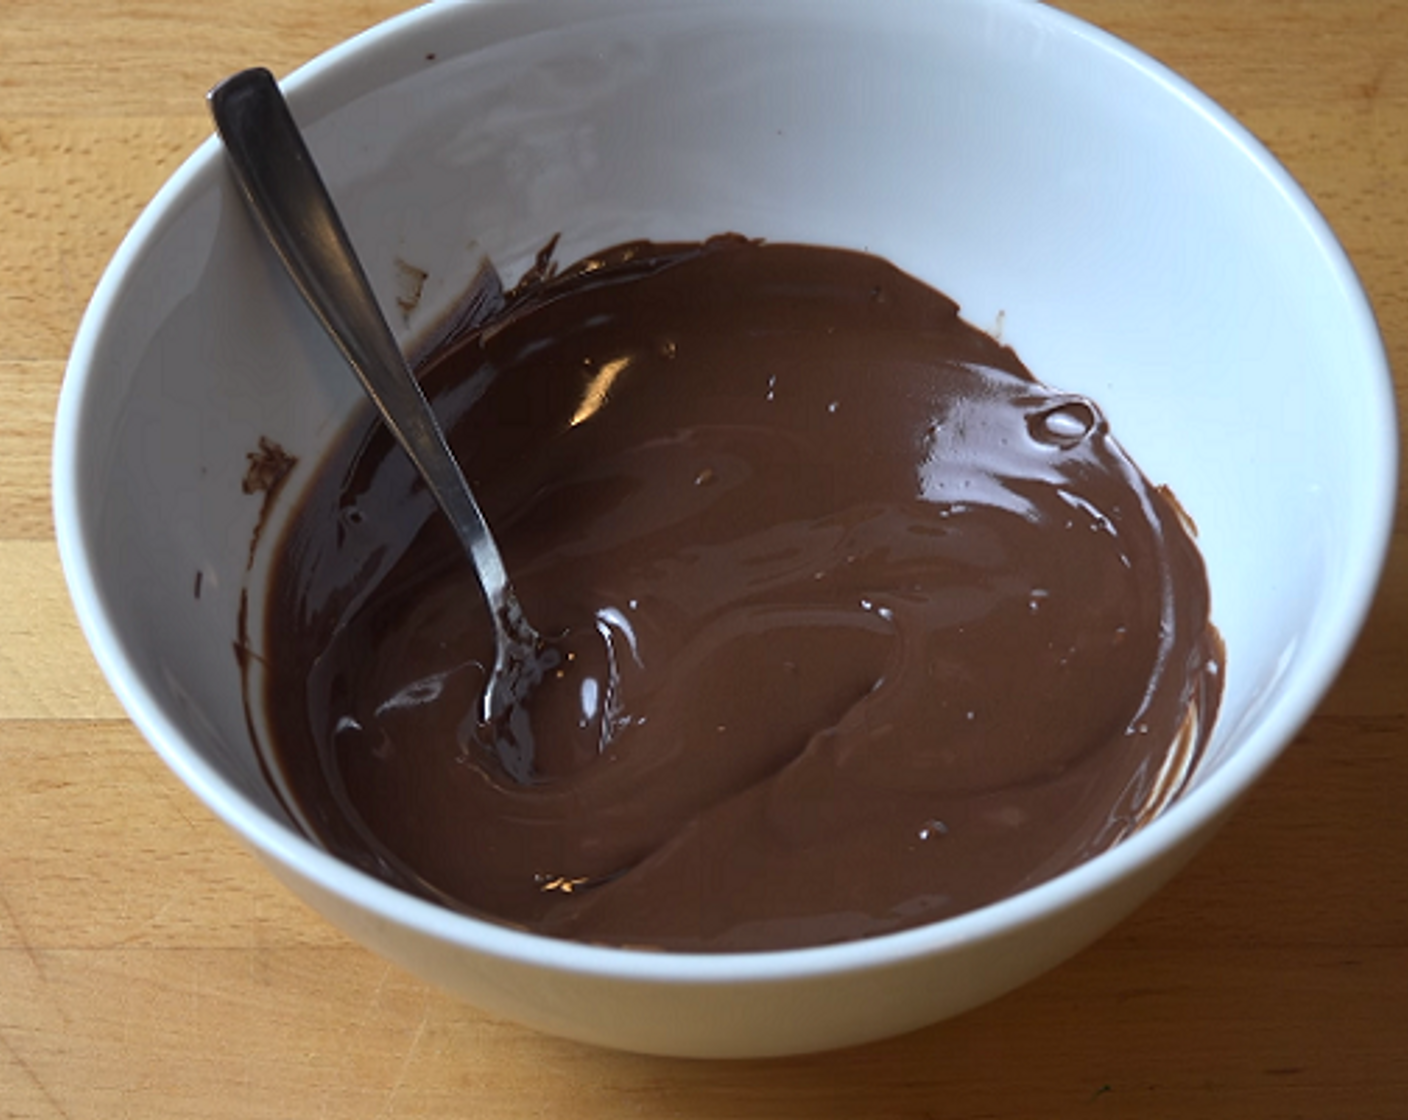 step 3 In a microwave-safe dish, add Semi-Sweet Dark Chocolate (1 3/4 cups). Microwave in 30-second bursts, stirring between each round until completely melted. Set aside to cool.